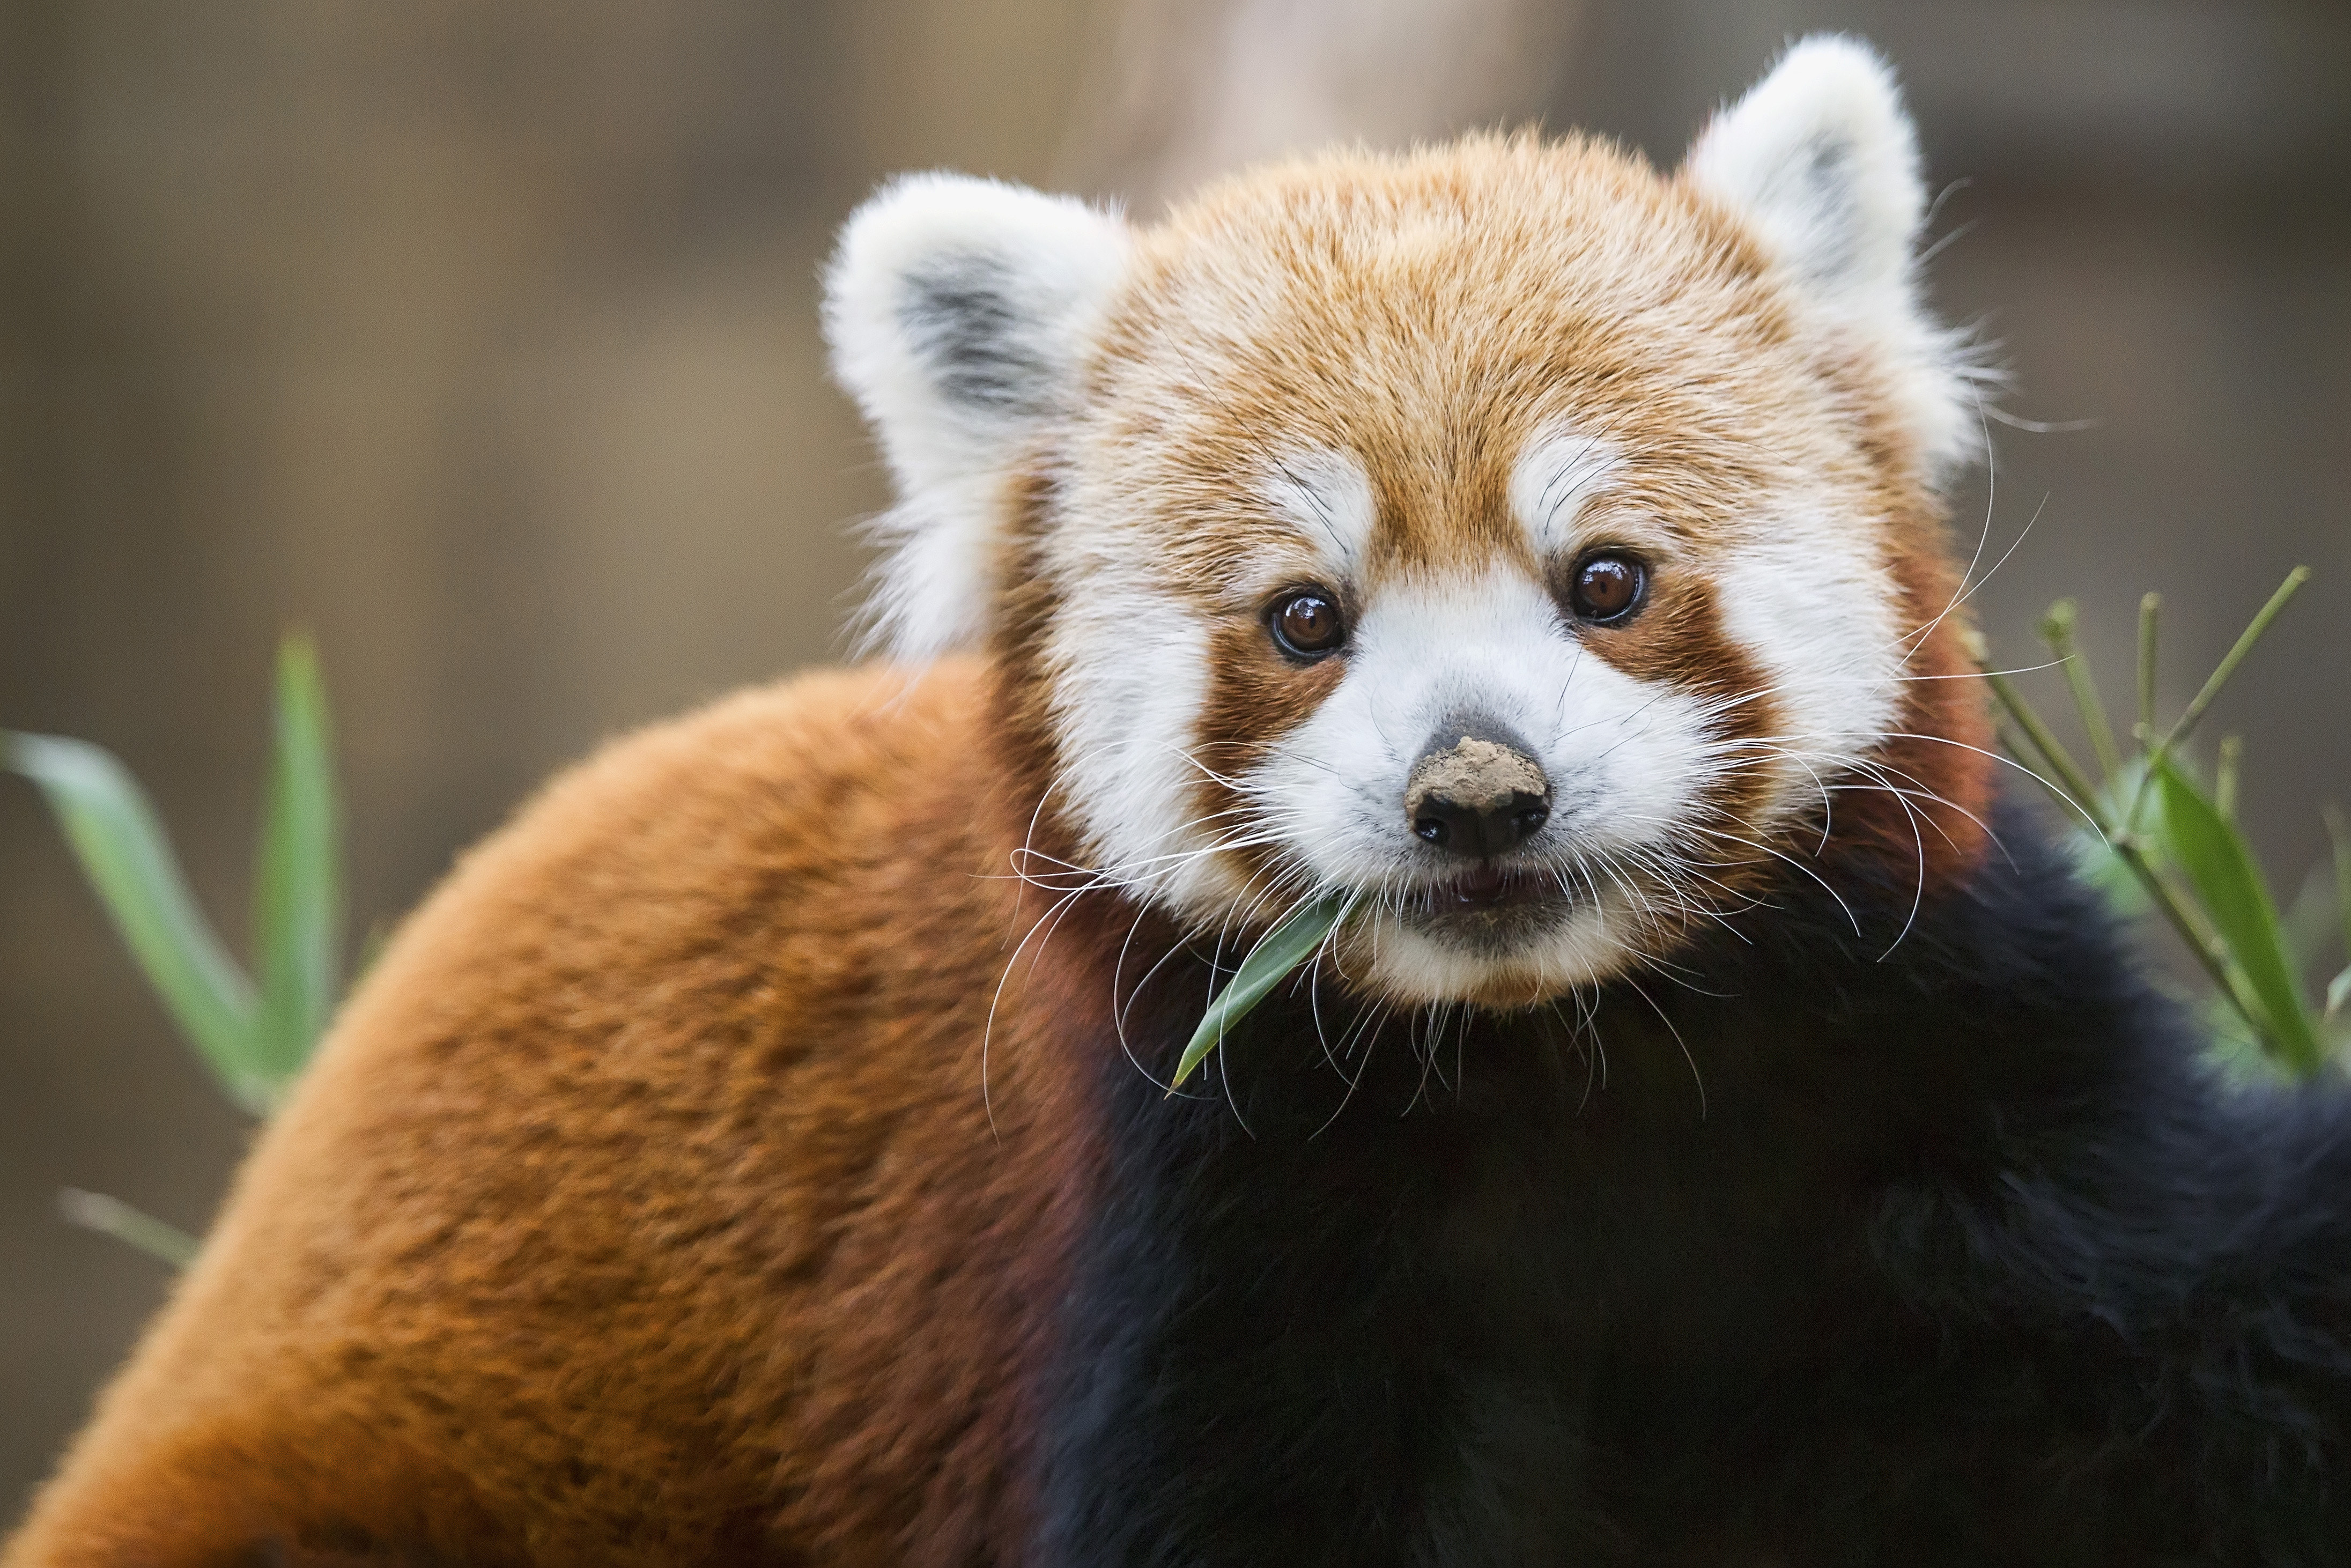 Sachi the red panda is ready to settle down